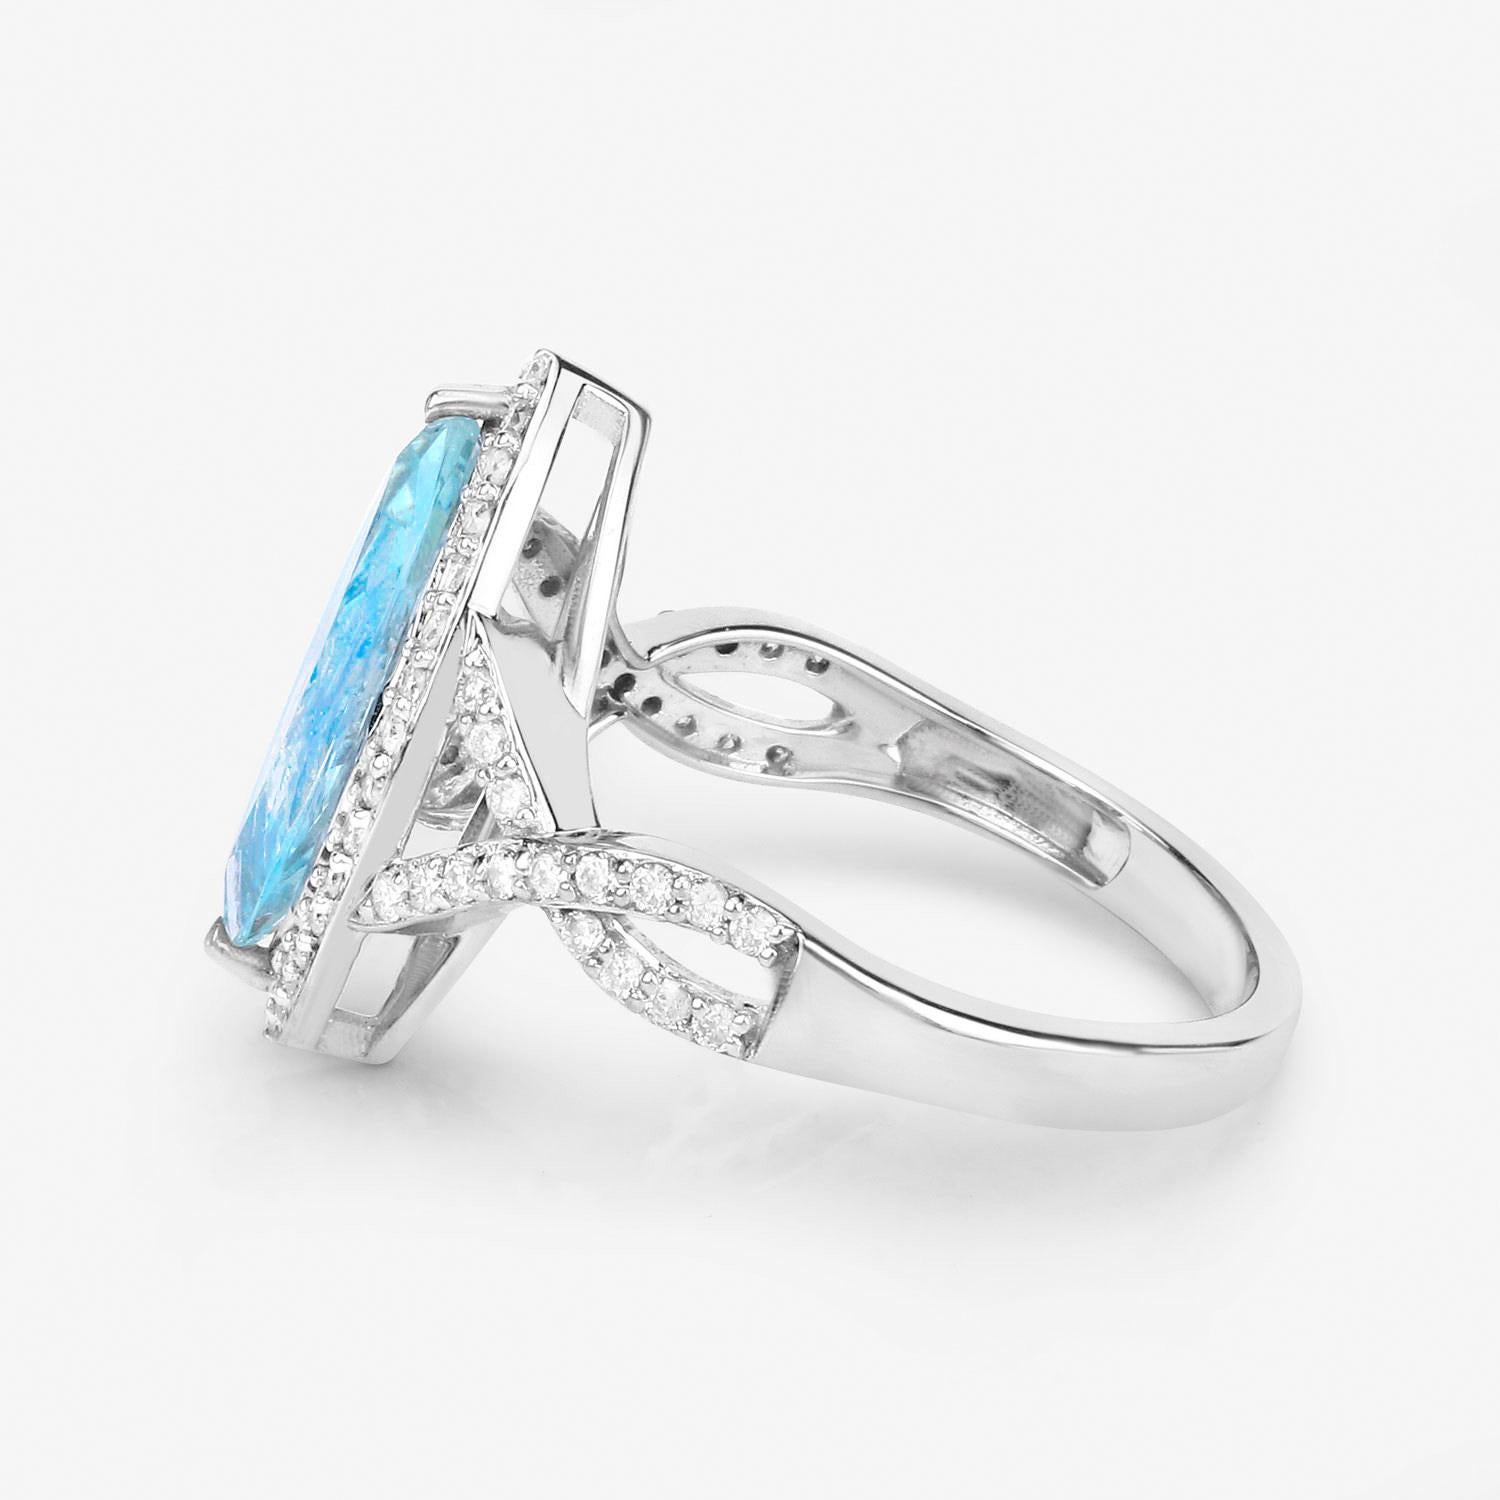 Aquamarine Ring With Diamonds 2.24 Carats 14K White Gold In Excellent Condition For Sale In Laguna Niguel, CA